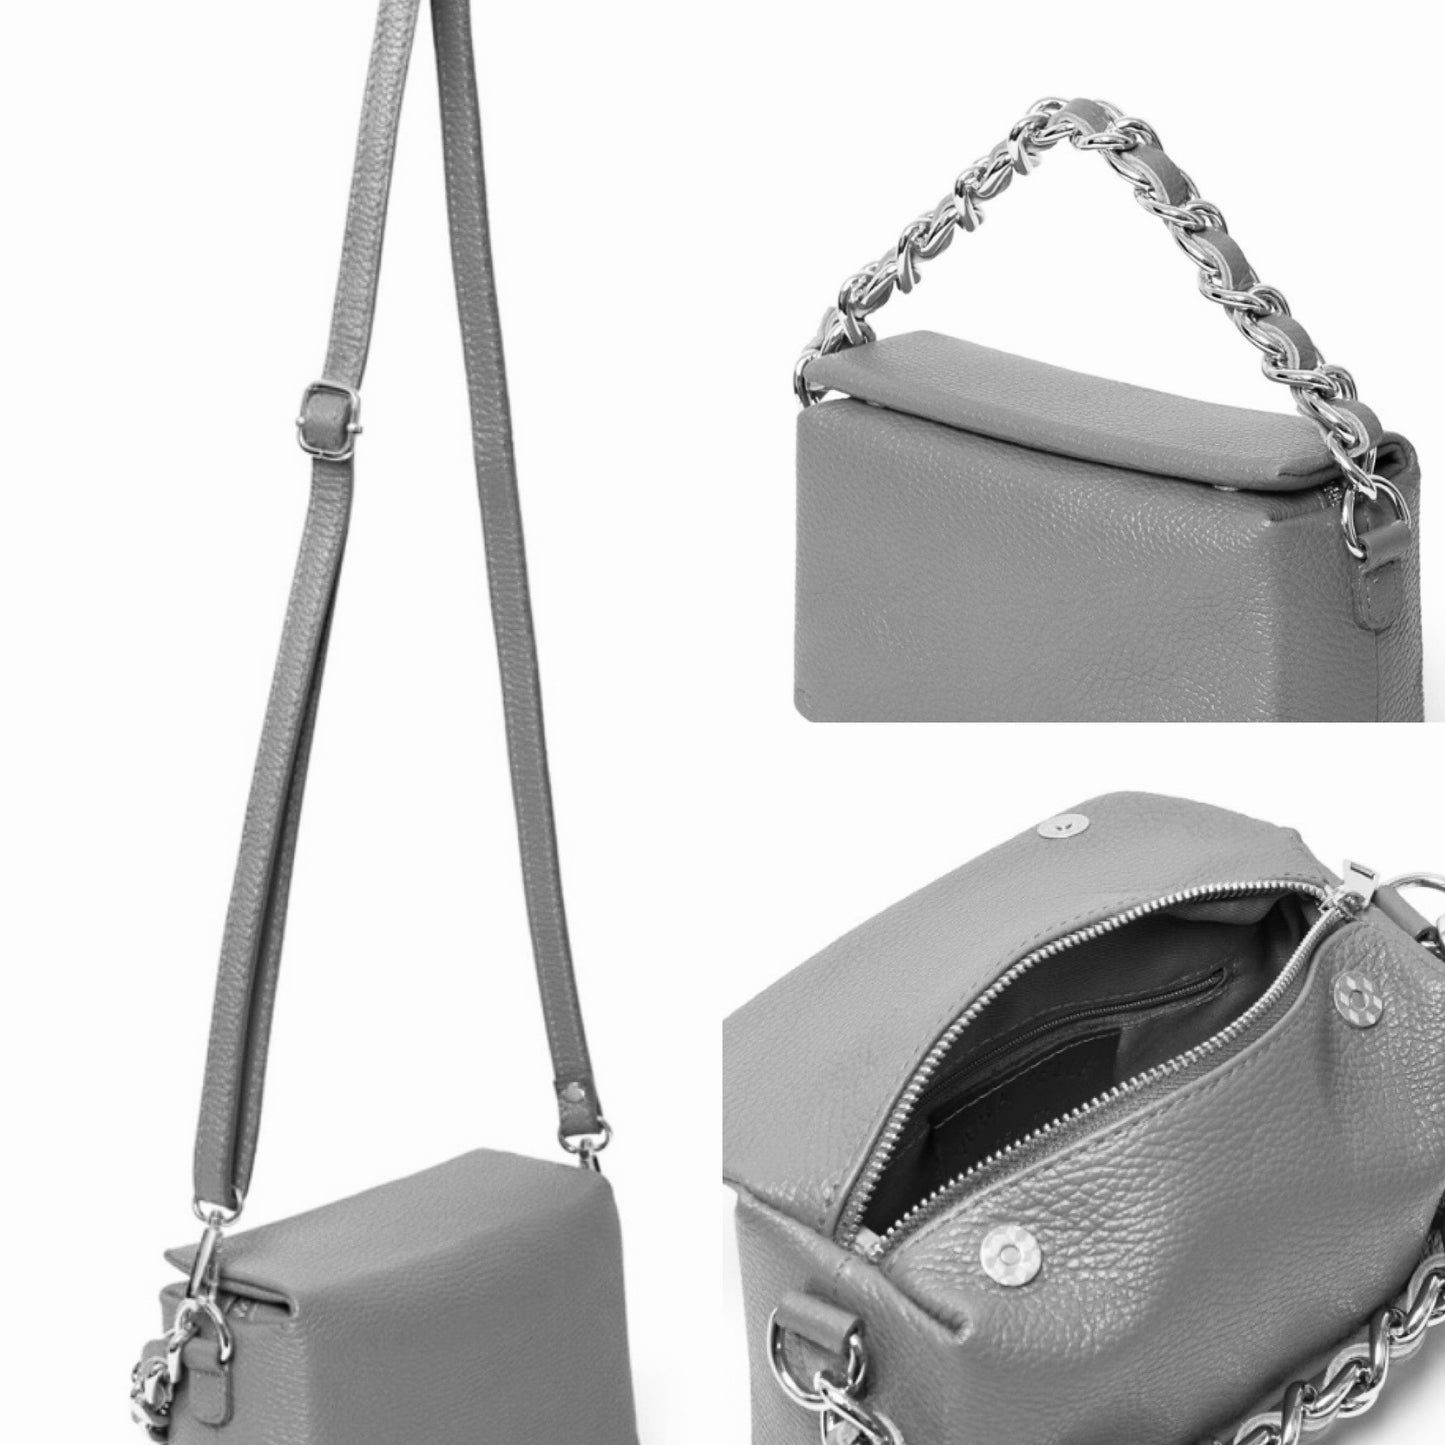 Blue Boxy Bag With Chain Handle